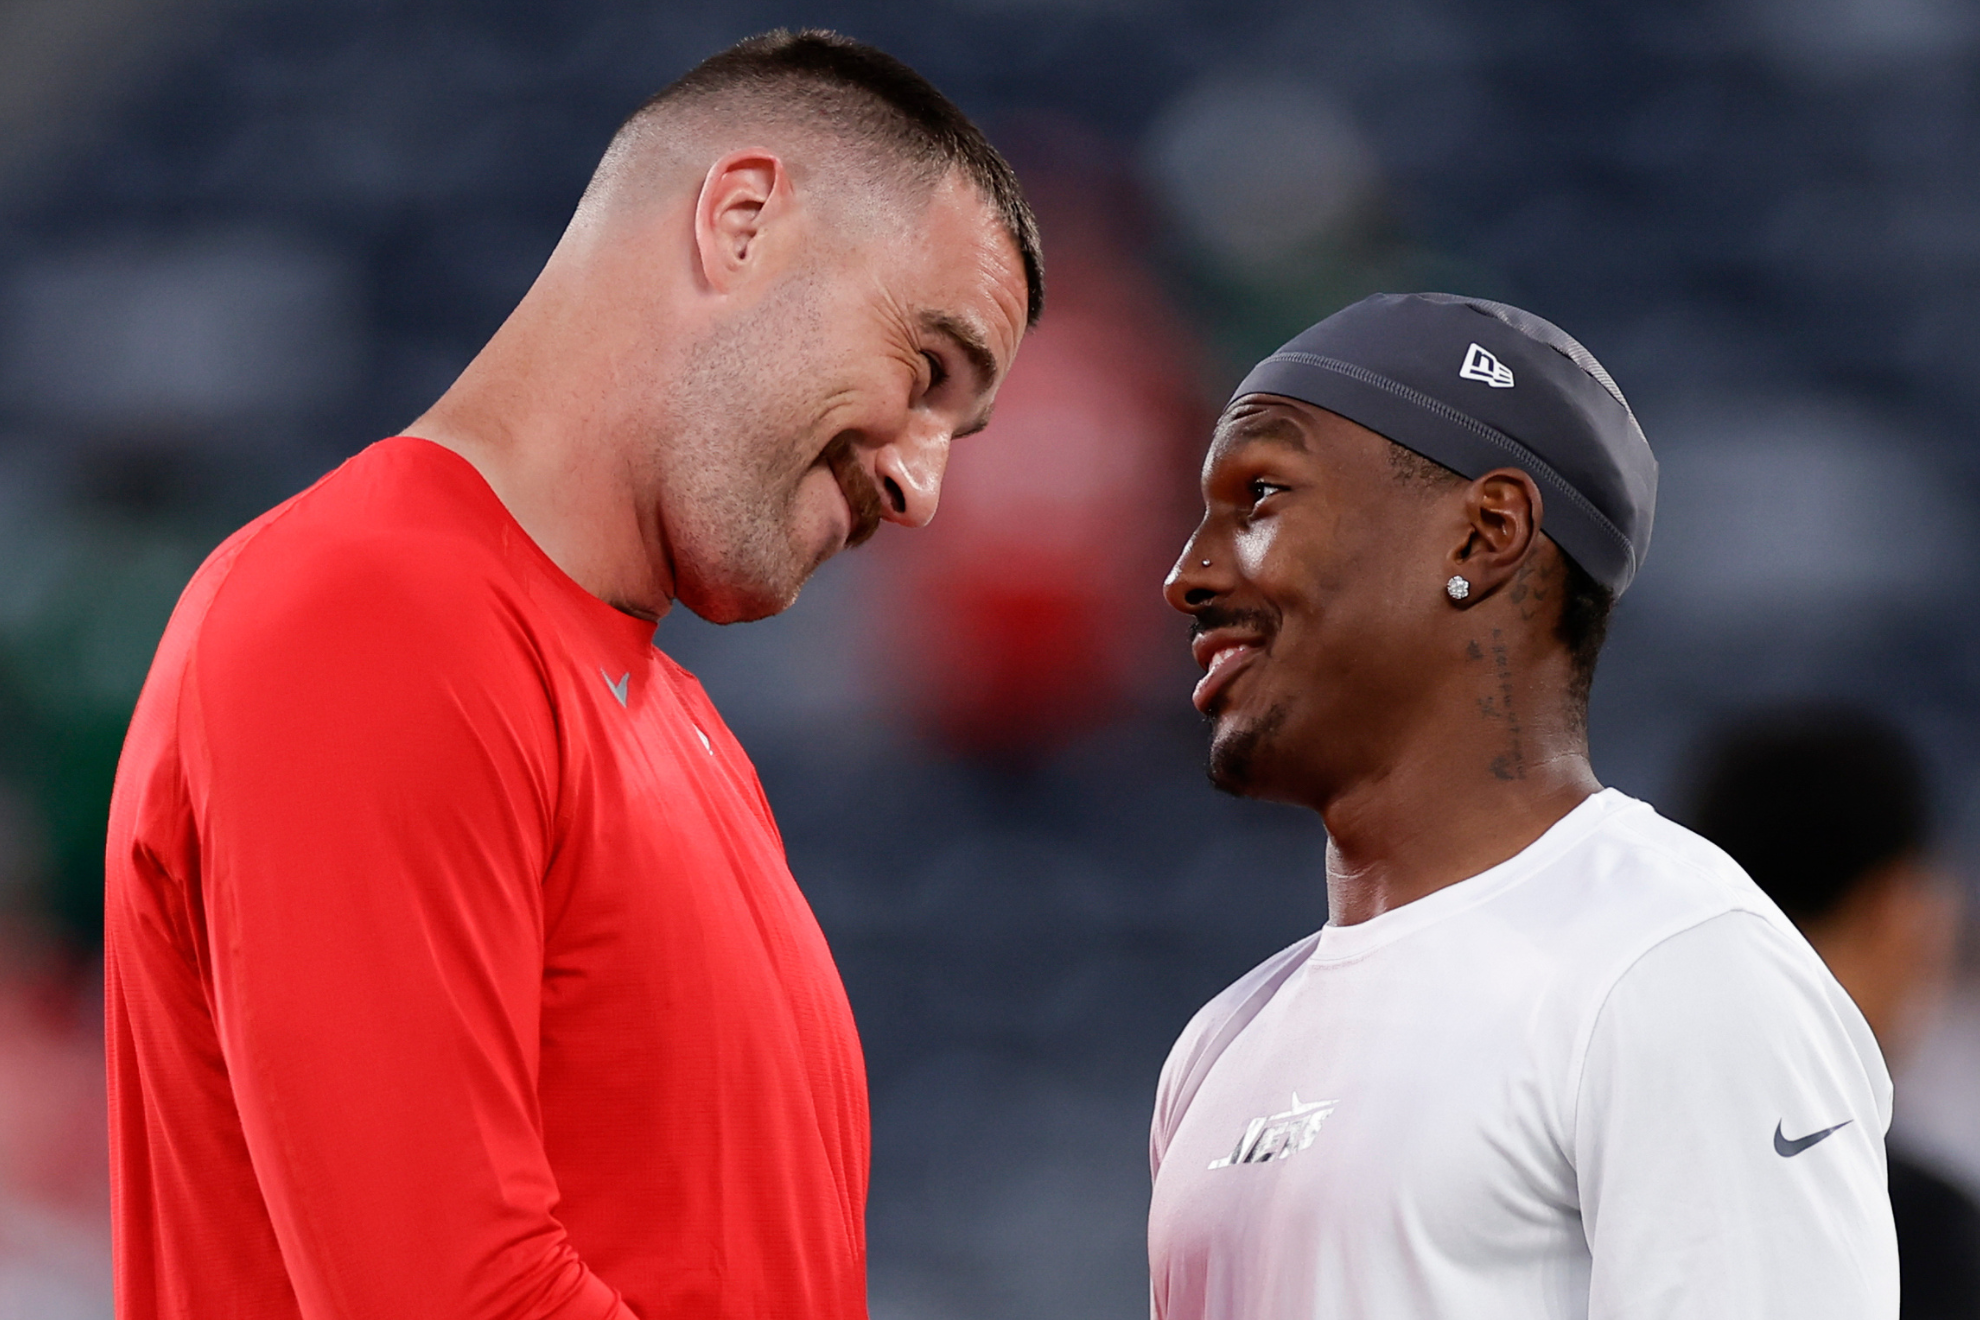 Hardman (right) speaks with Travis Kelce (left) prior to the Chiefs-Jets game in October.